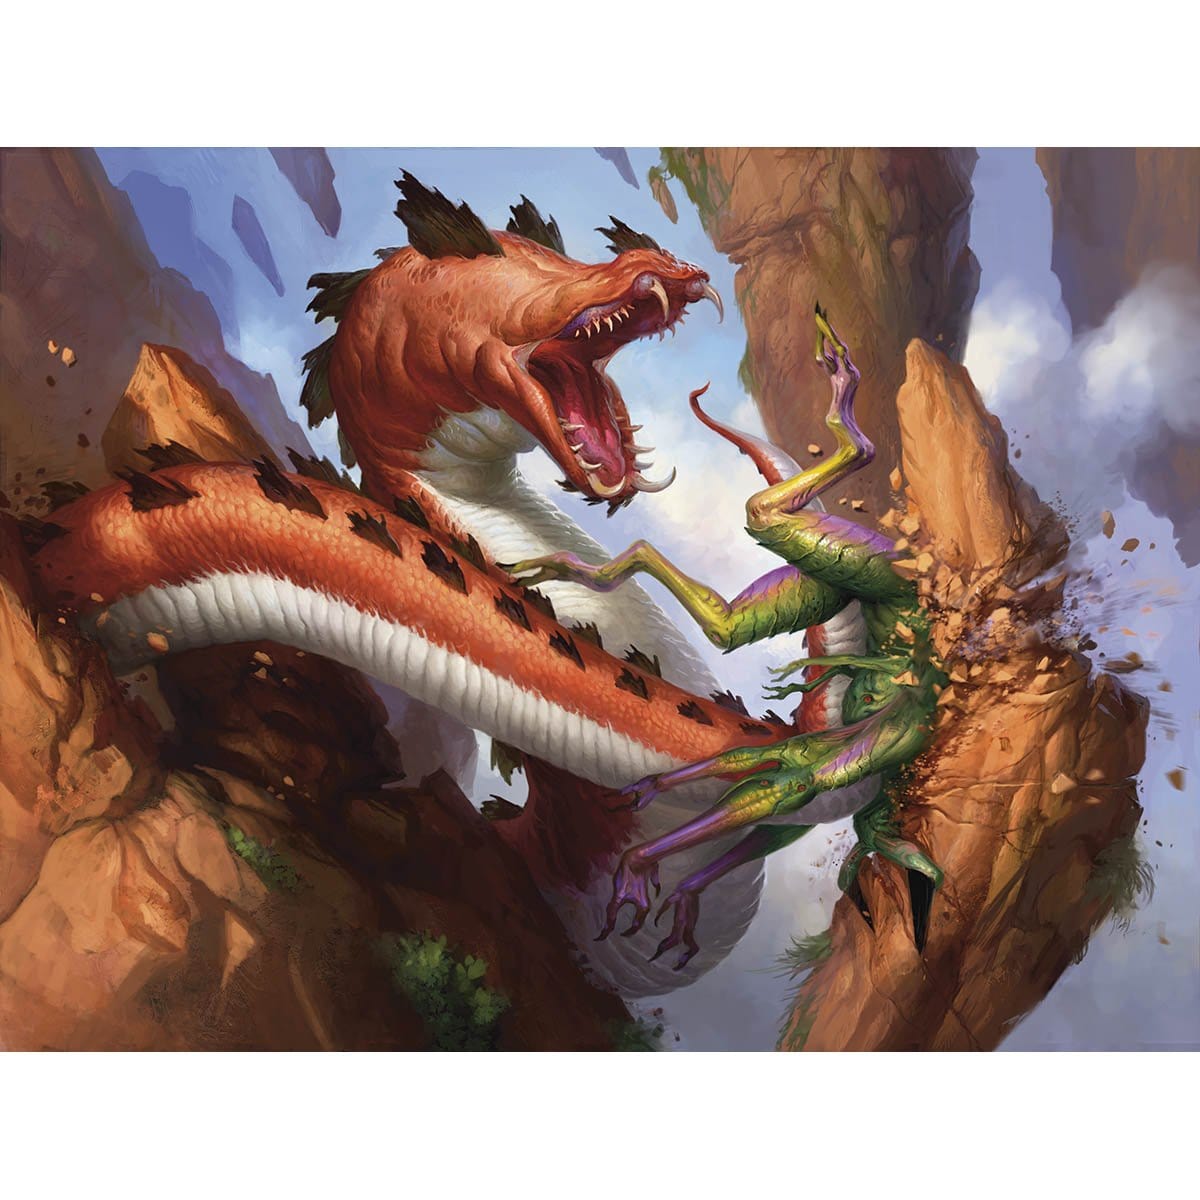 Belligerent Whiptail Print - Print - Original Magic Art - Accessories for Magic the Gathering and other card games